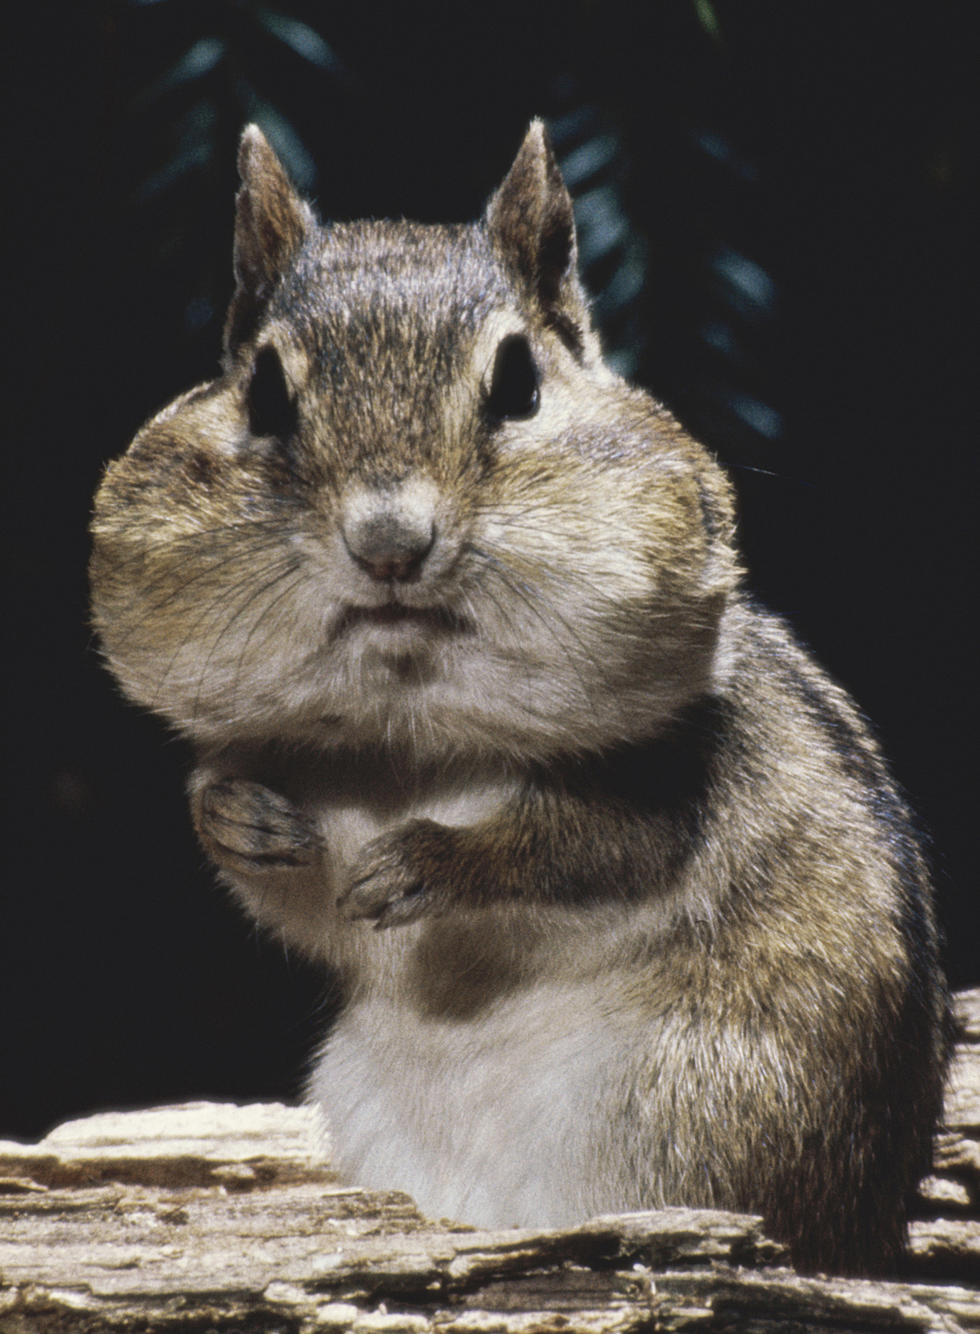 HEY NH!  What's Up With All The Chipmunks This Year?